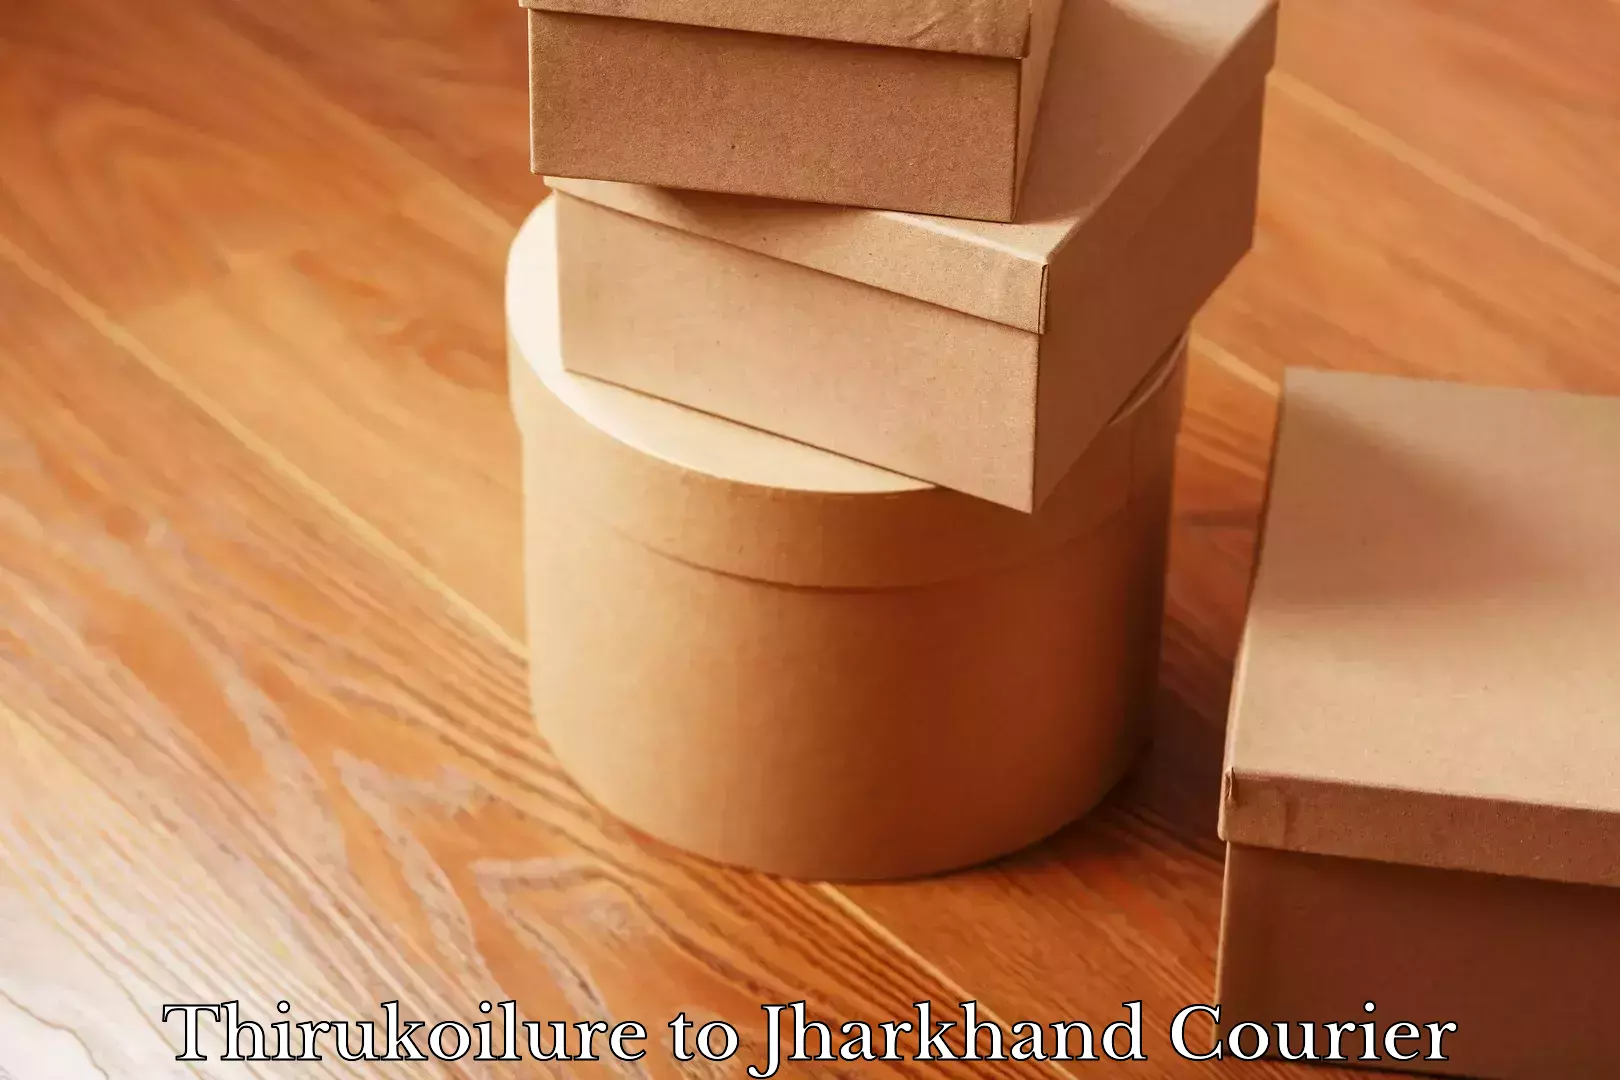 Reliable shipping partners Thirukoilure to Jharkhand